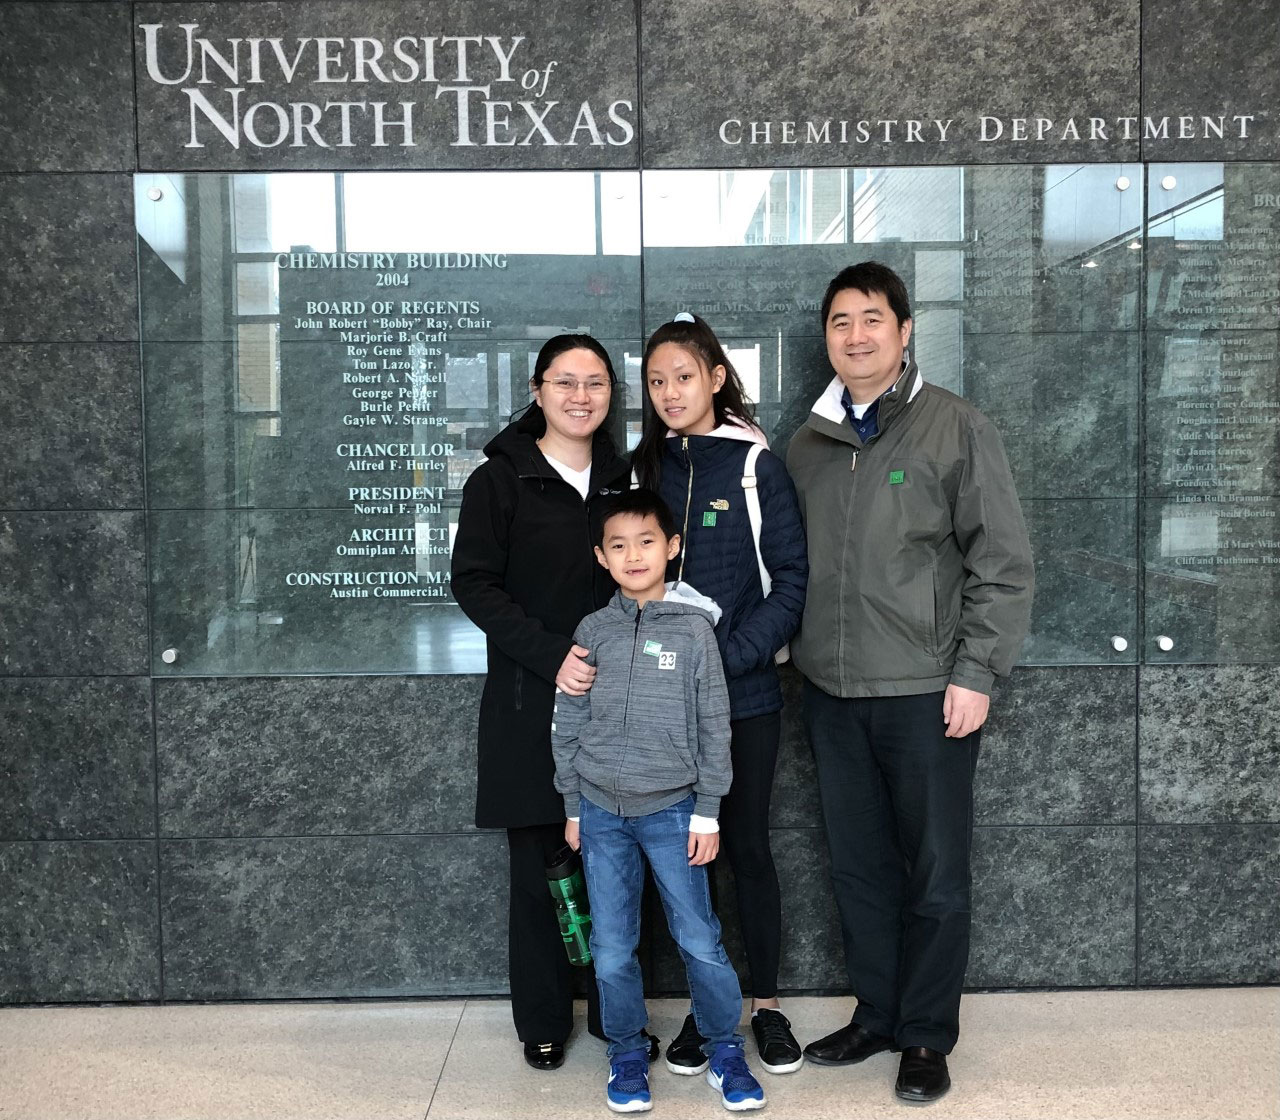 Xia and Zhang made a visit to UNT in 2019 with their son and daughter. “We enjoy our work. We enjoy our family,